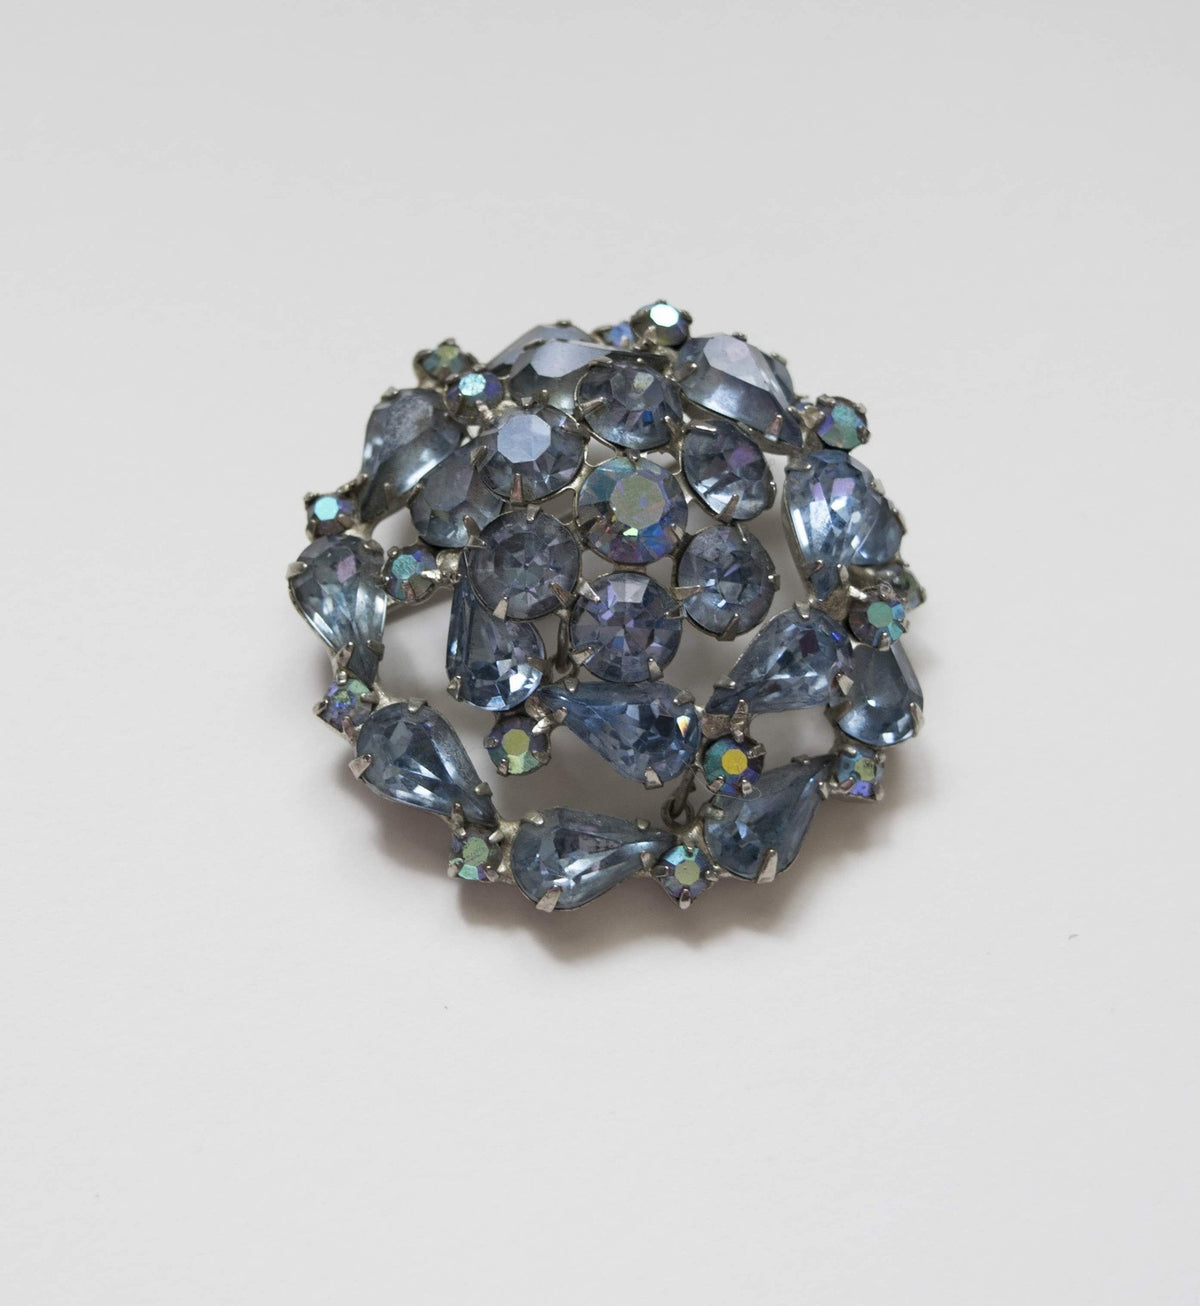 Weiss Blue Crystals Brooch Pin Vintage Jewelry